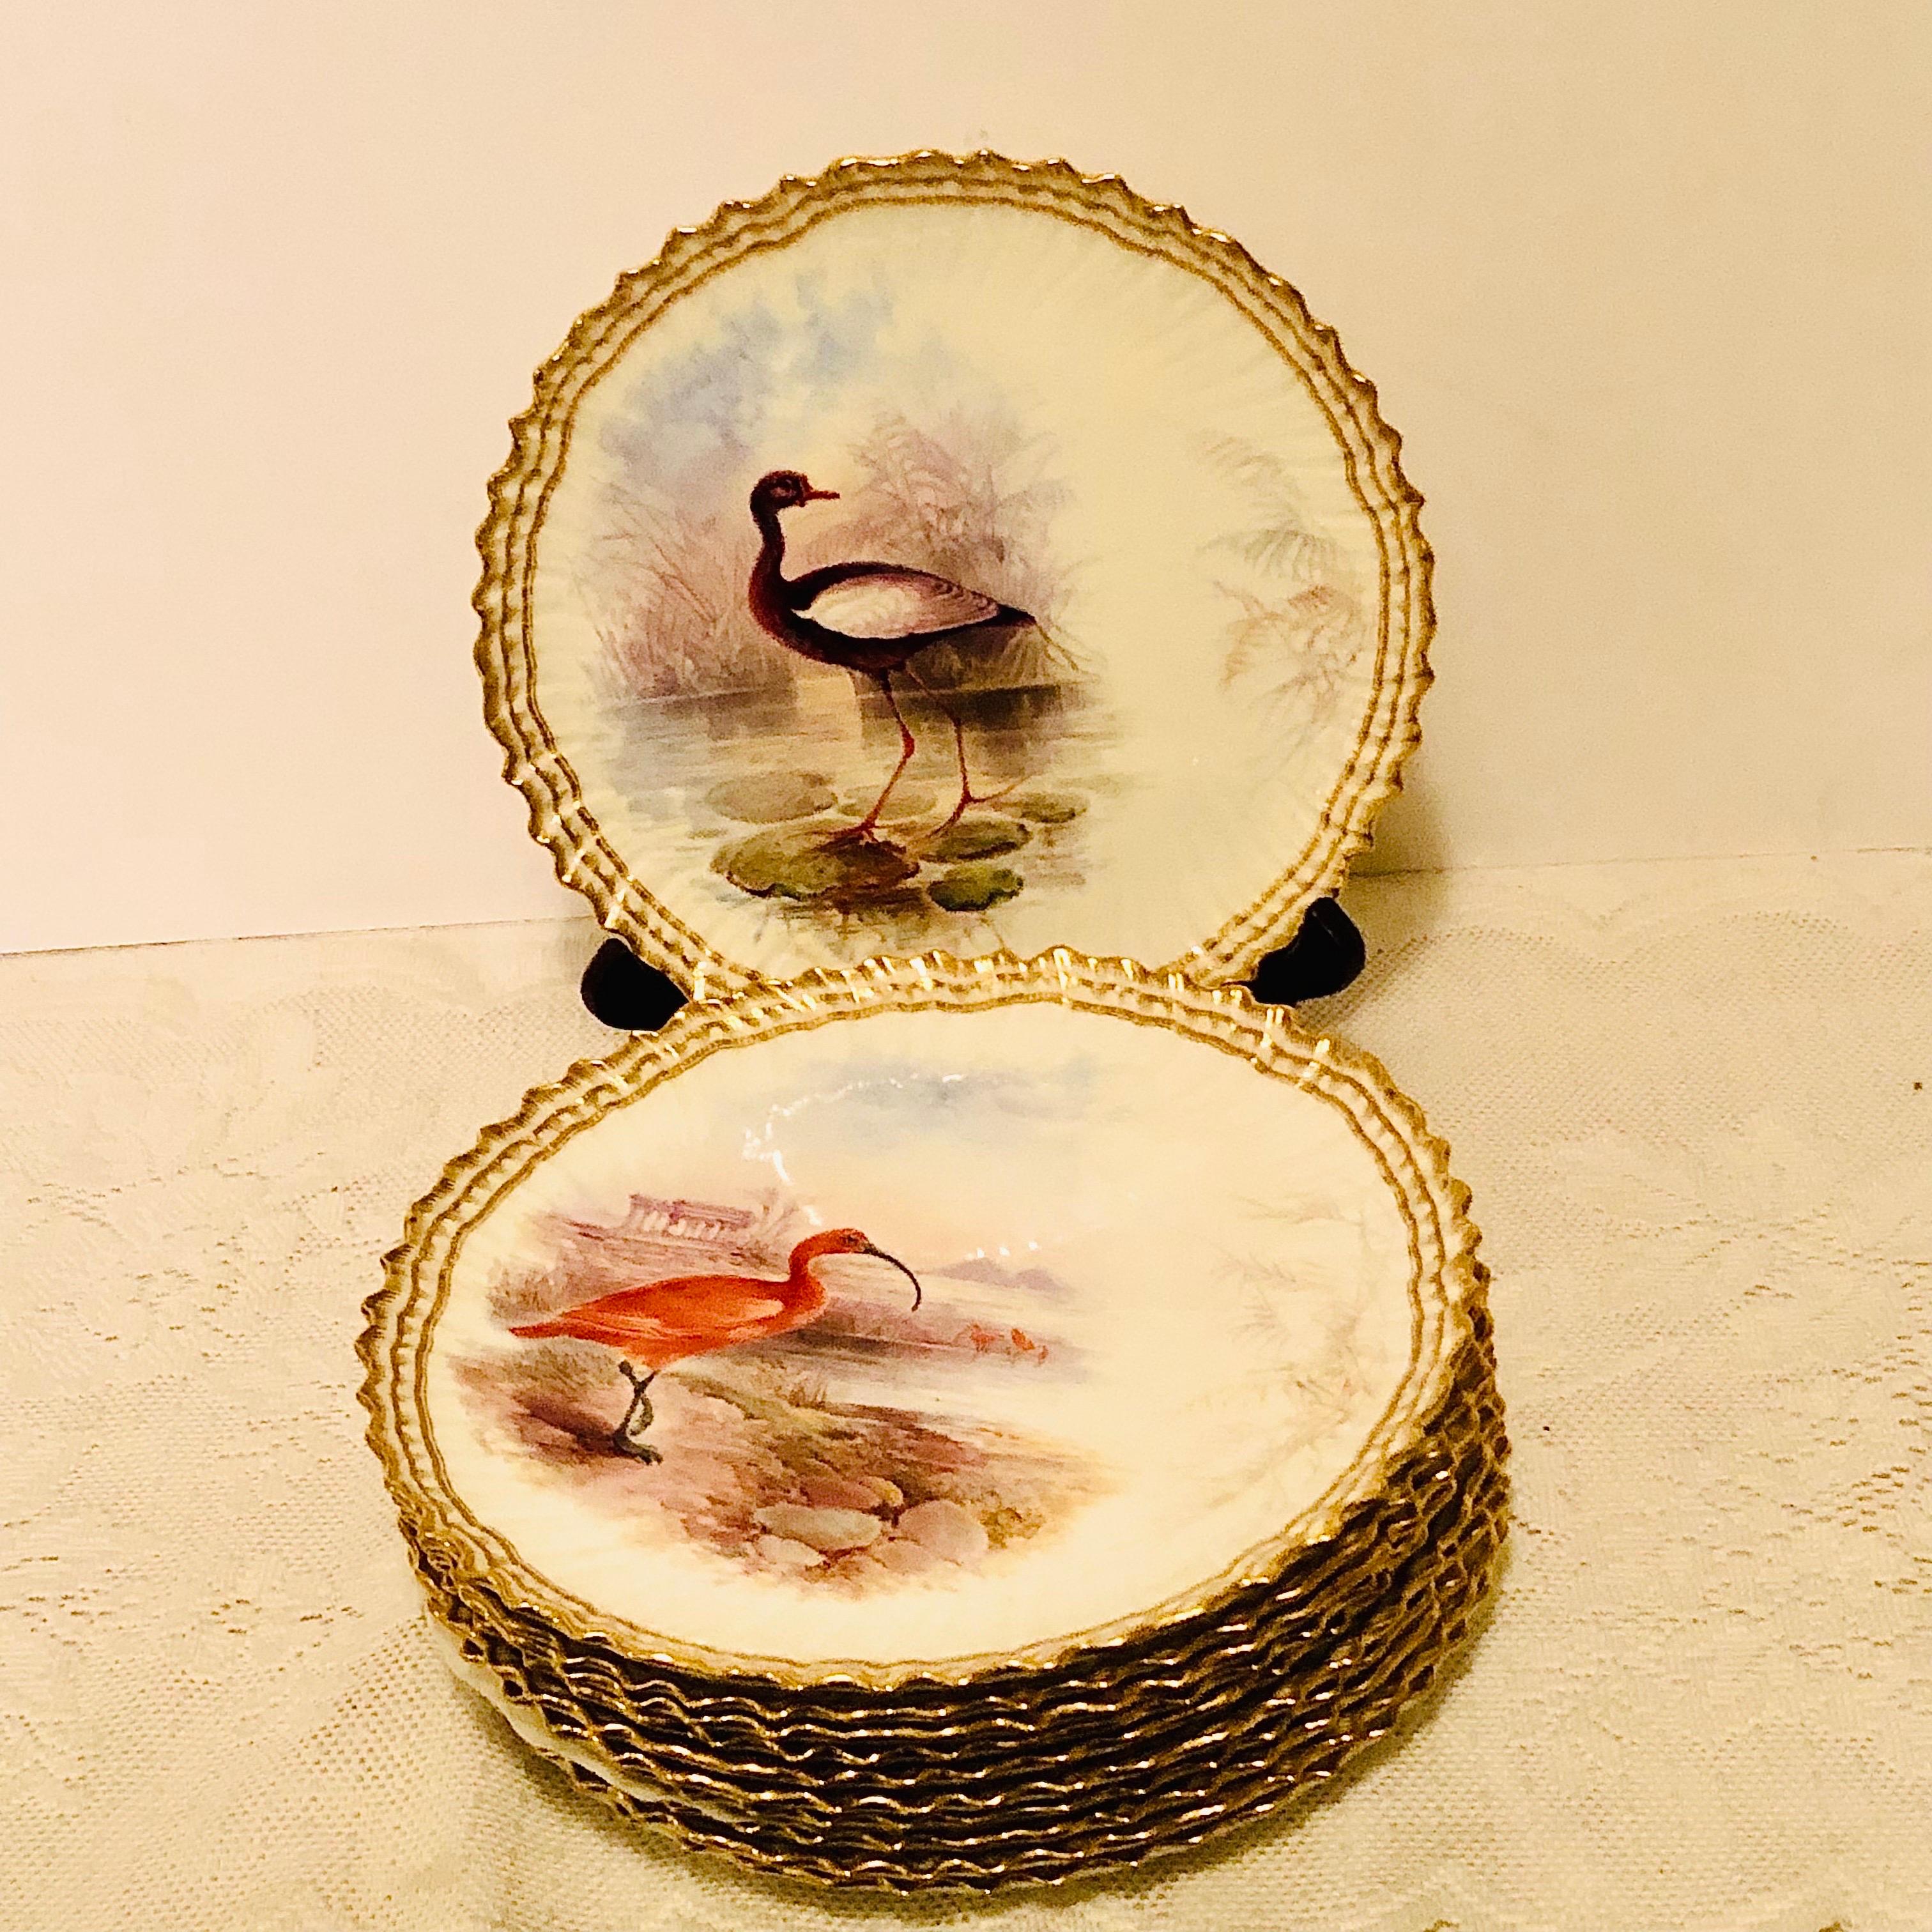 English Set of 11 Cauldon Plates Each Painted Exquisitely With a Different Bird 